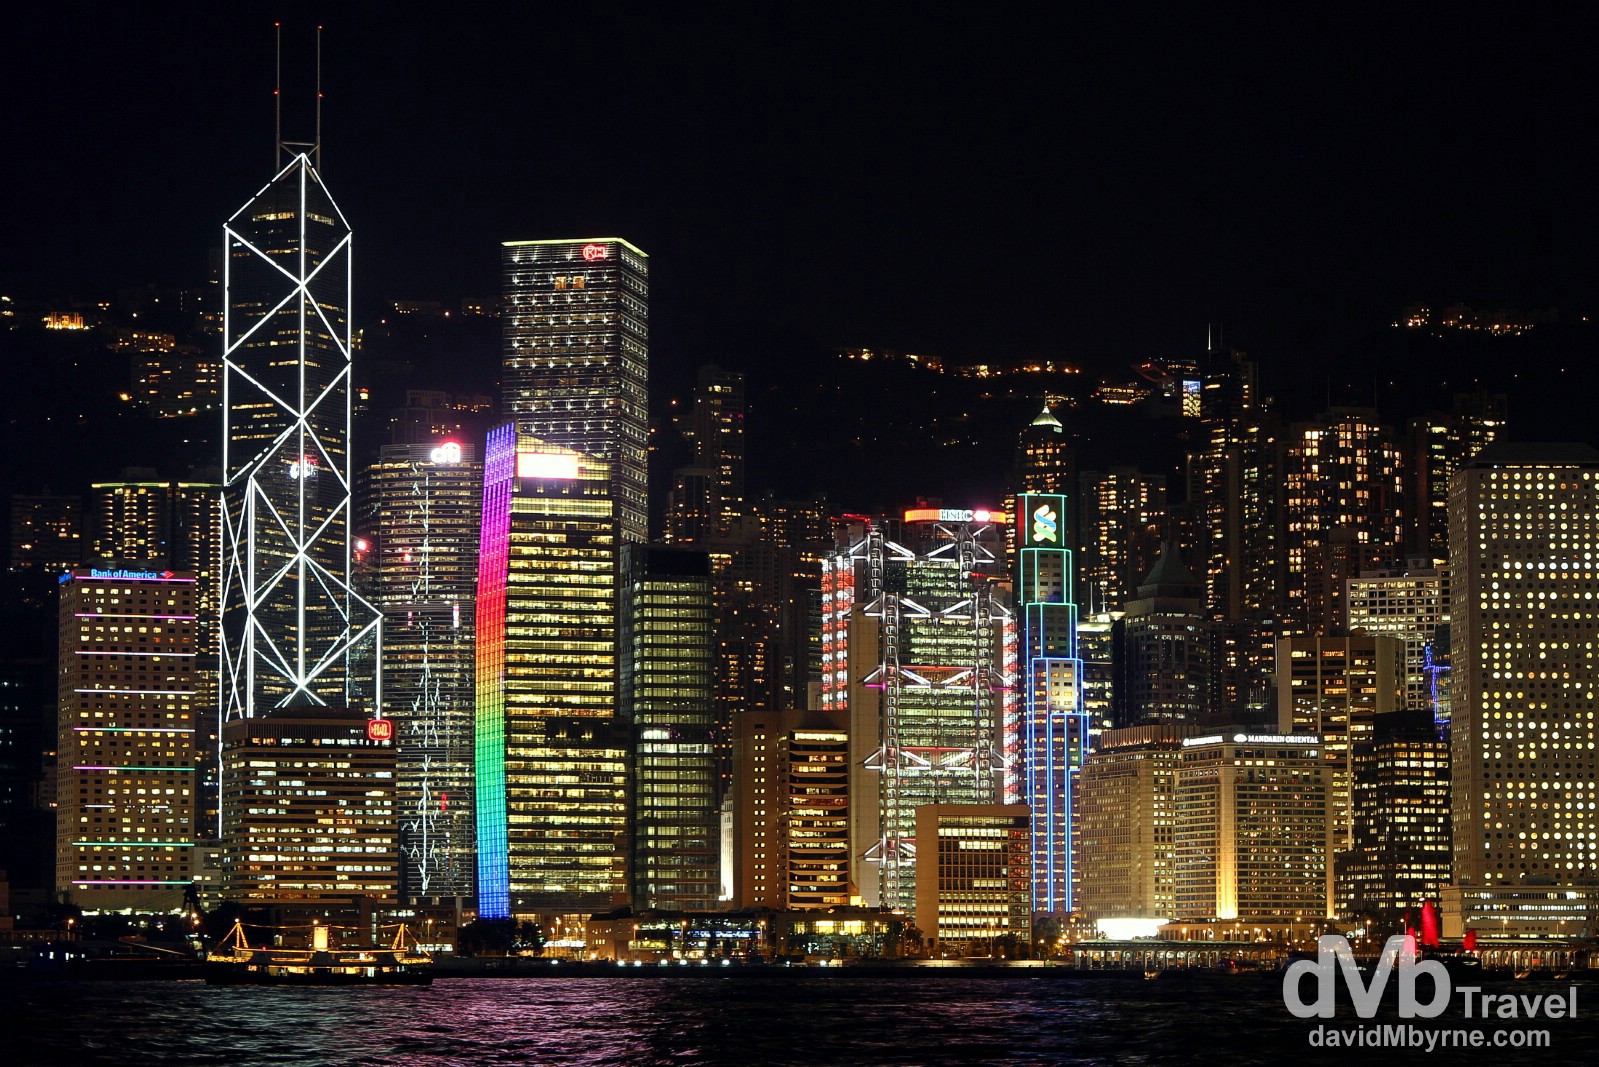 The Hong Kong Money Shot #1: The neon skyline of Central Hong Kong as seen from across Victoria Harbour in Kowloon. Hong Kong, China. October 17th 2012.